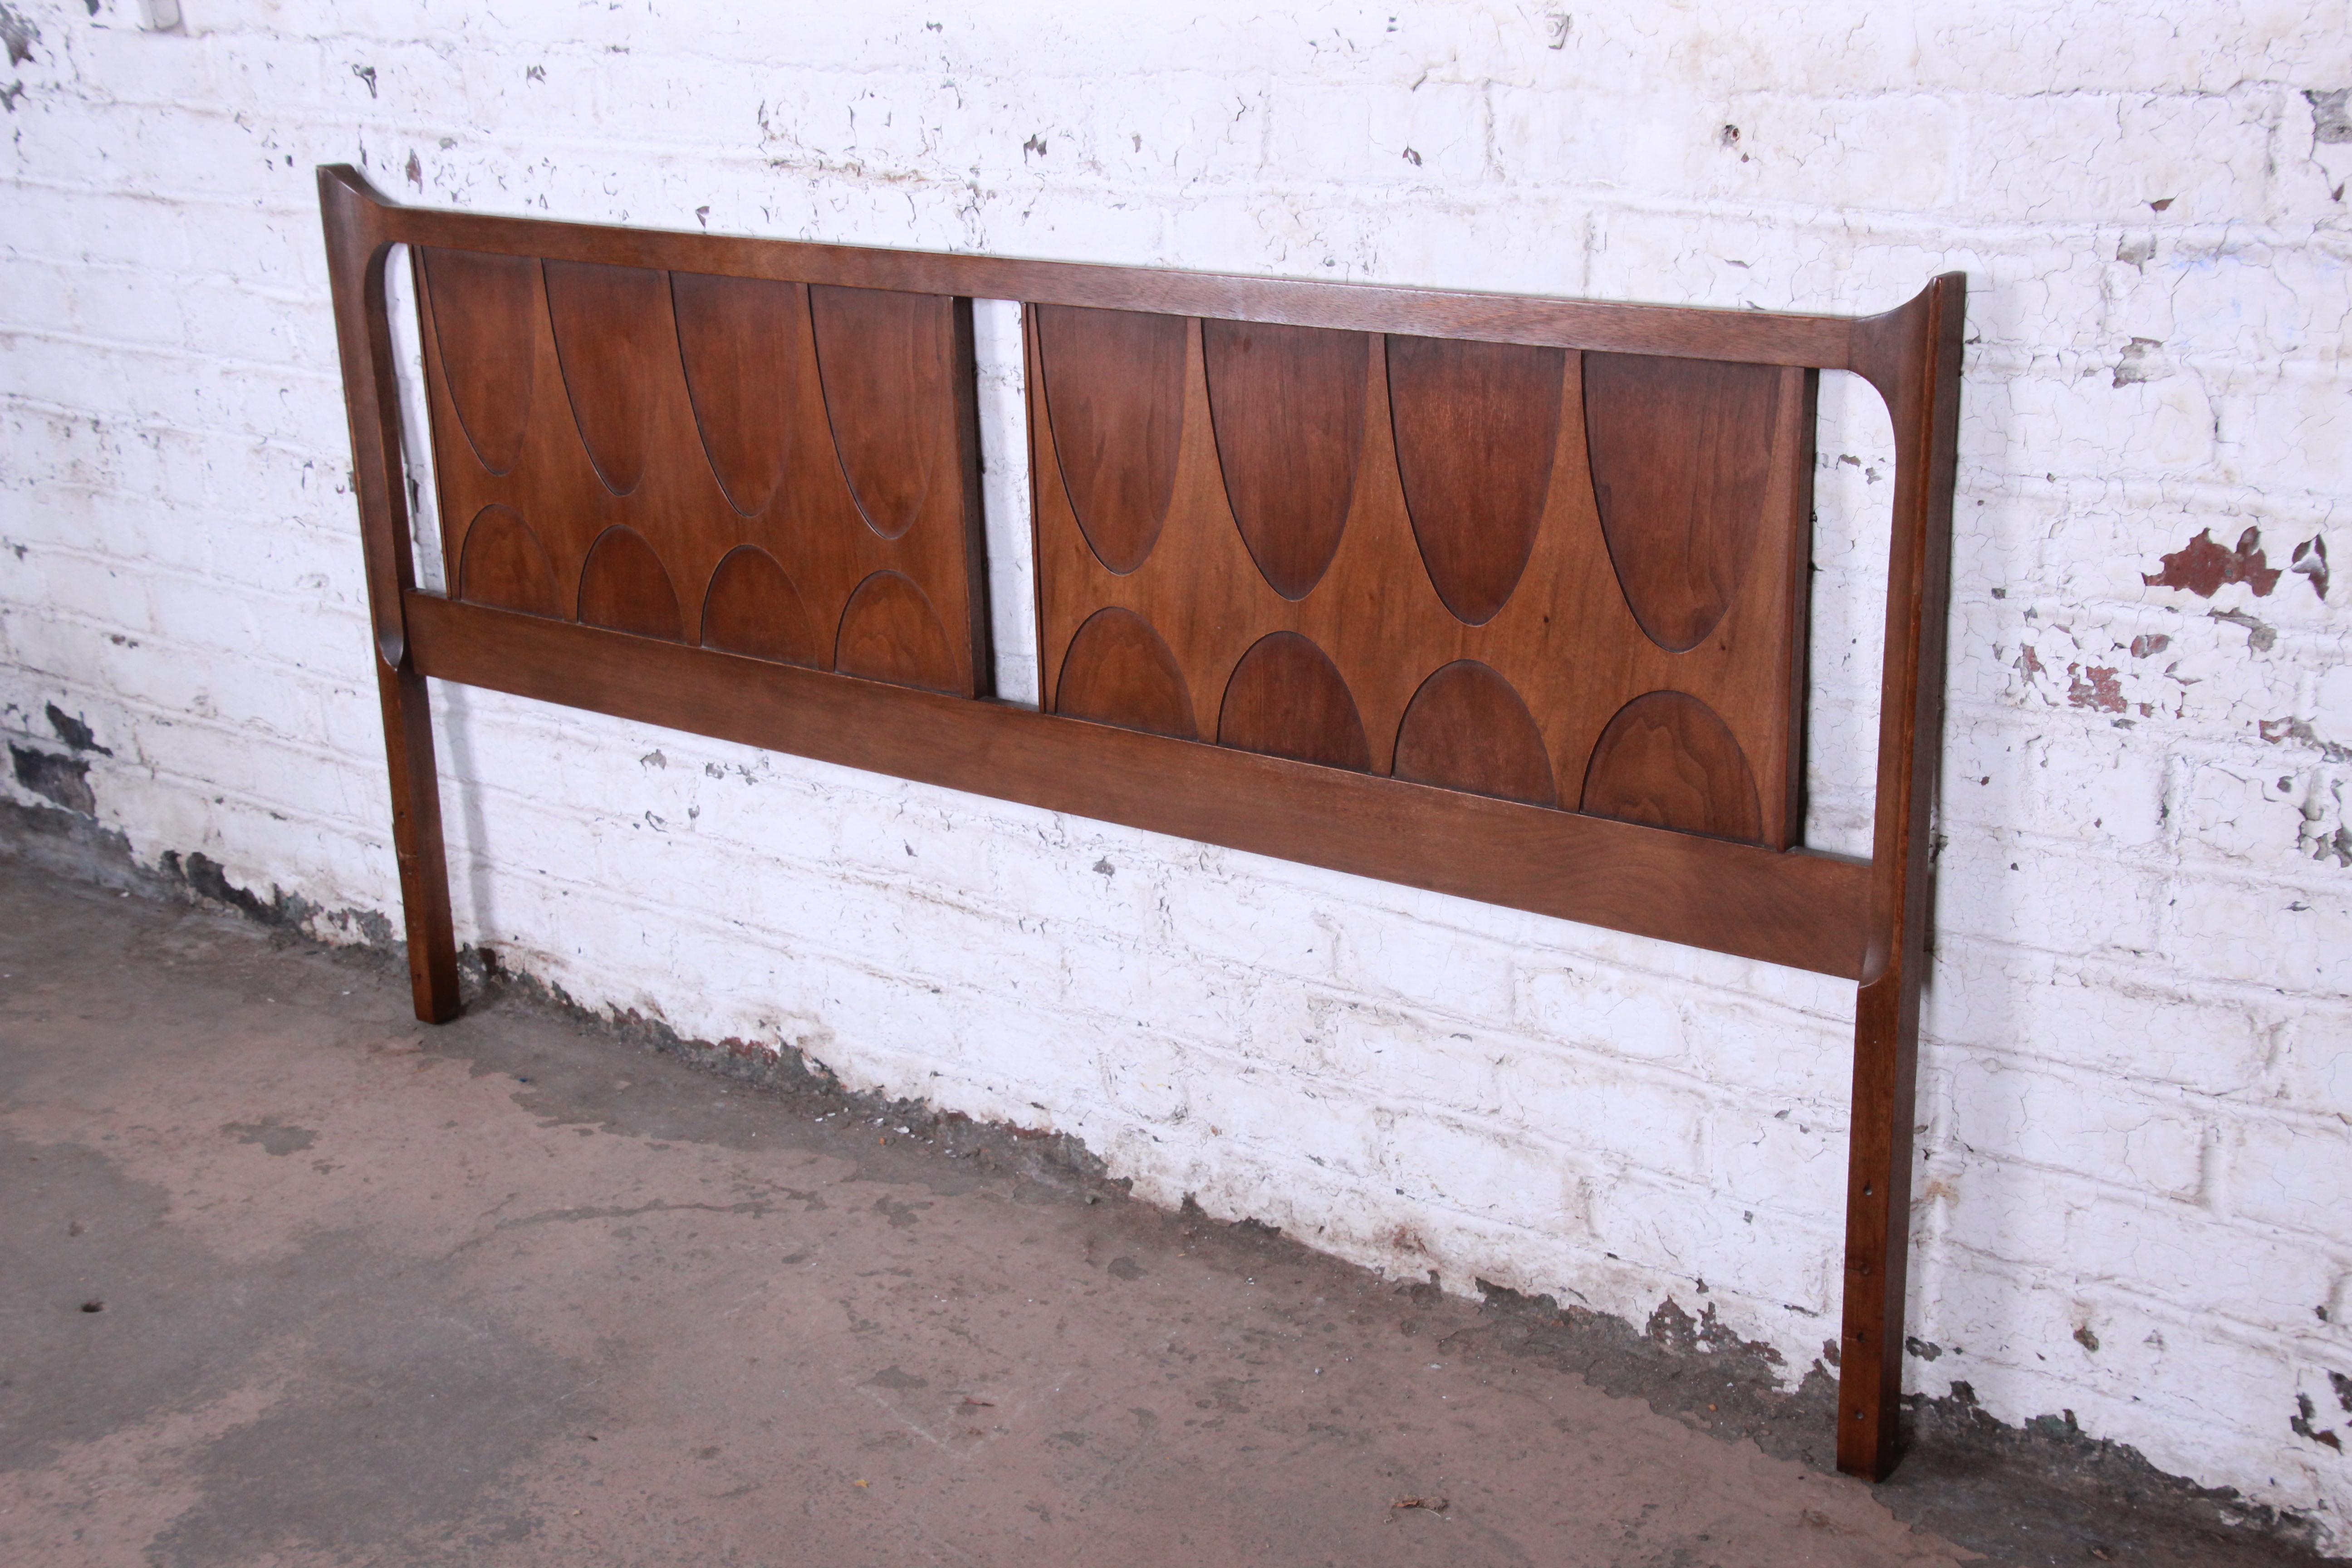 A gorgeous Mid-Century Modern sculpted walnut king size headboard by Broyhill Brasilia. The headboard features beautiful walnut wood grain and Classic Brasilia design. Rare to find this in a king size. The headboard is in very good original vintage